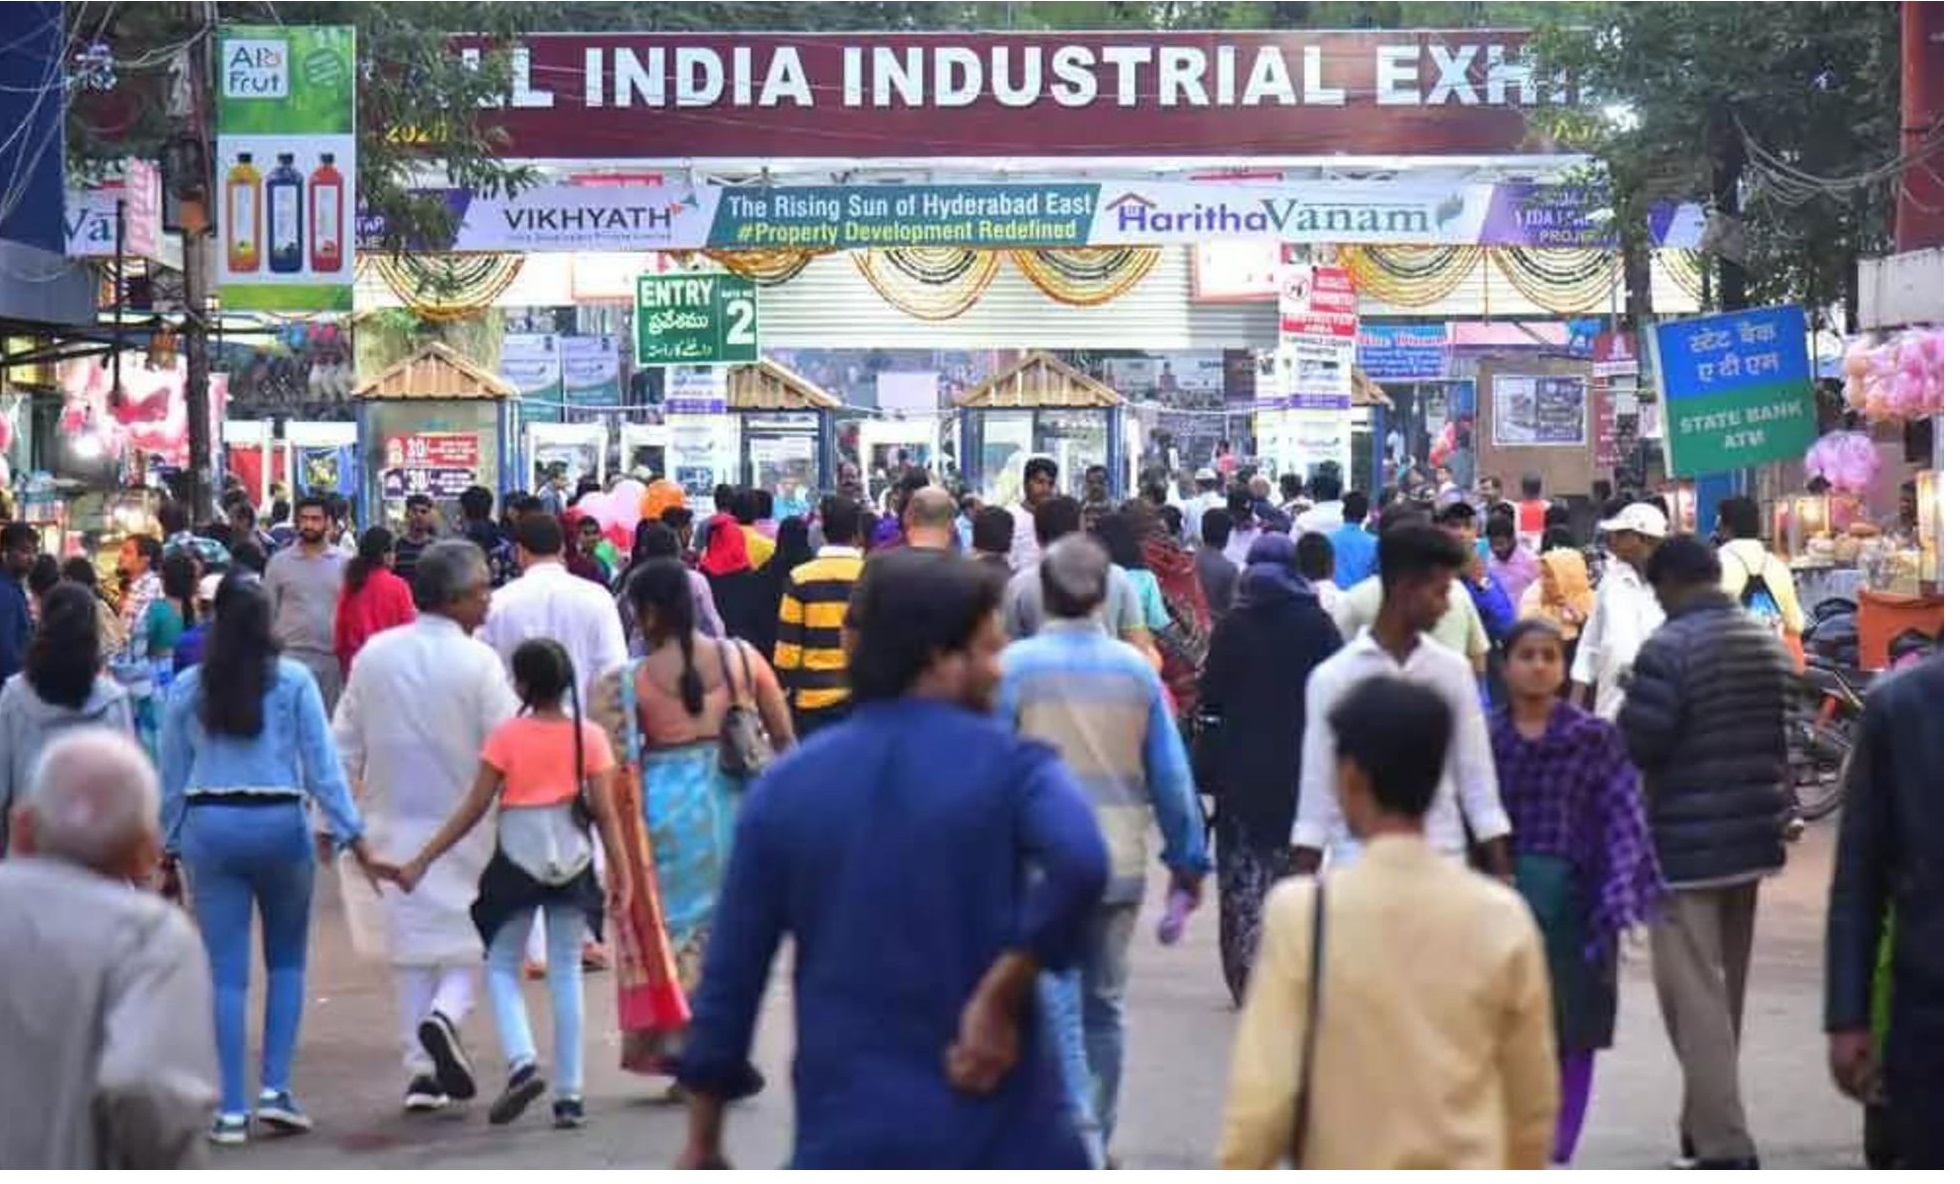 All India Industrial Exhibition